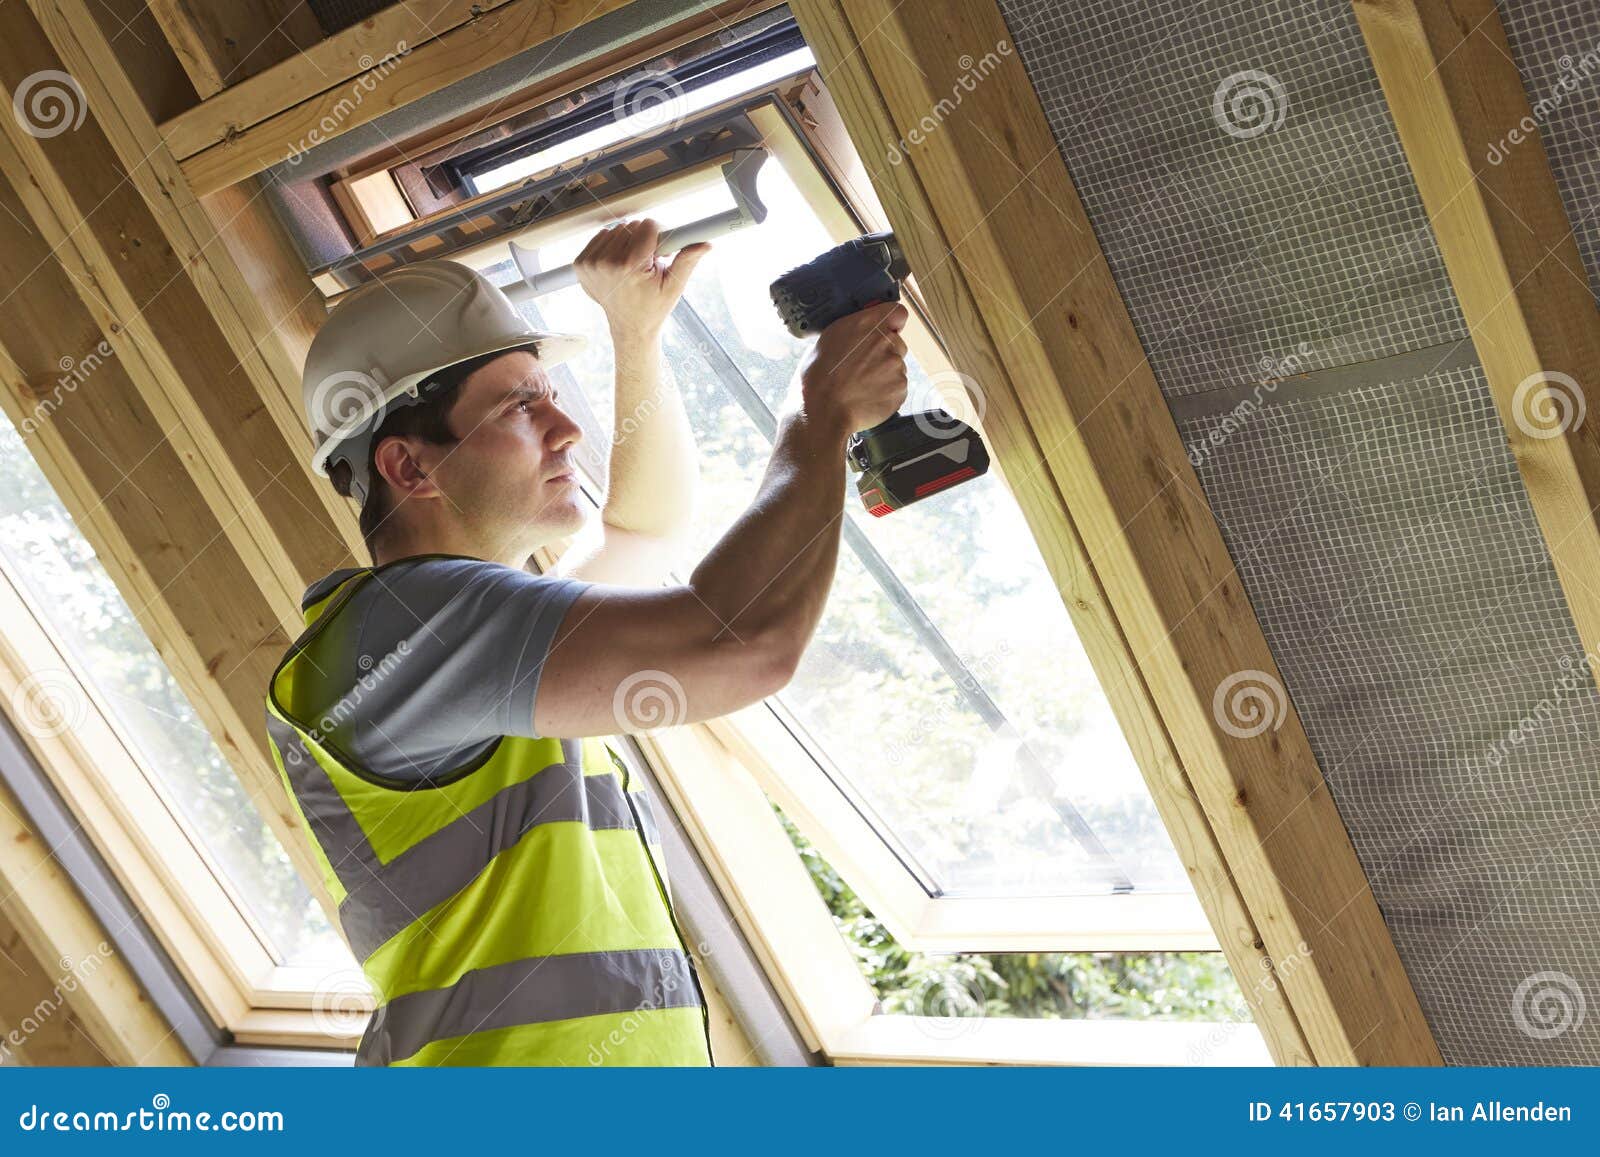 construction worker using drill to install window